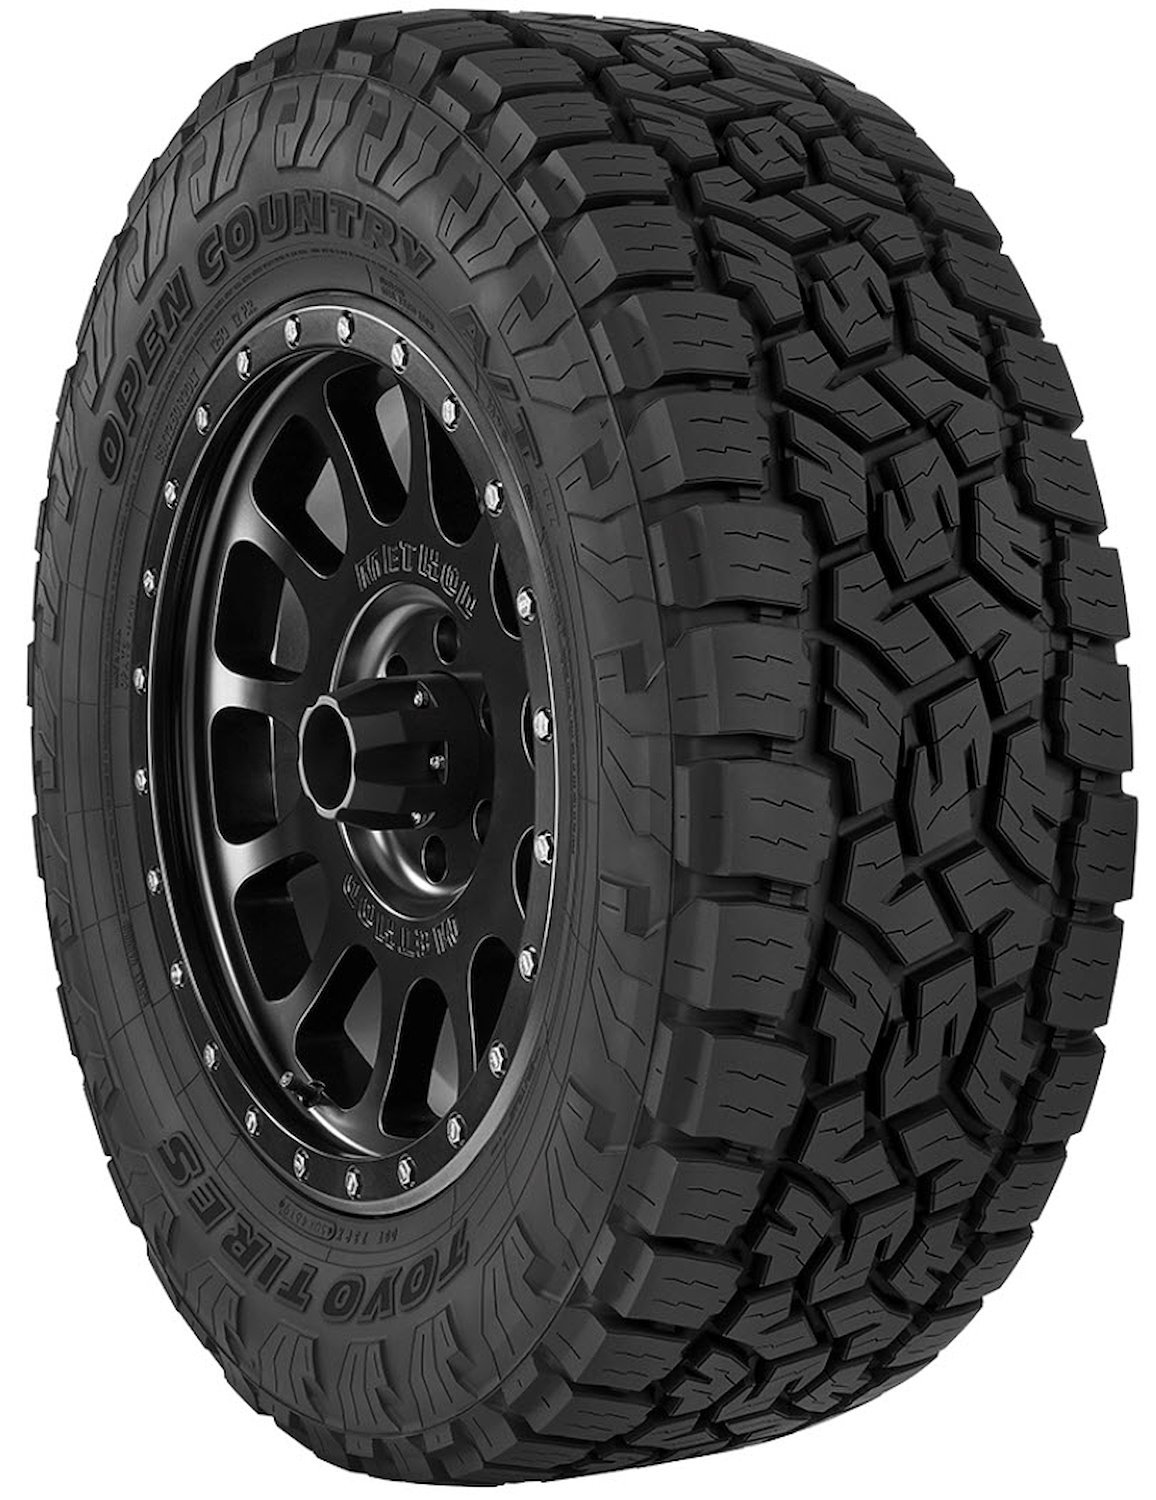 Open Country A/T III Light Truck Radial Tire 225/60R17